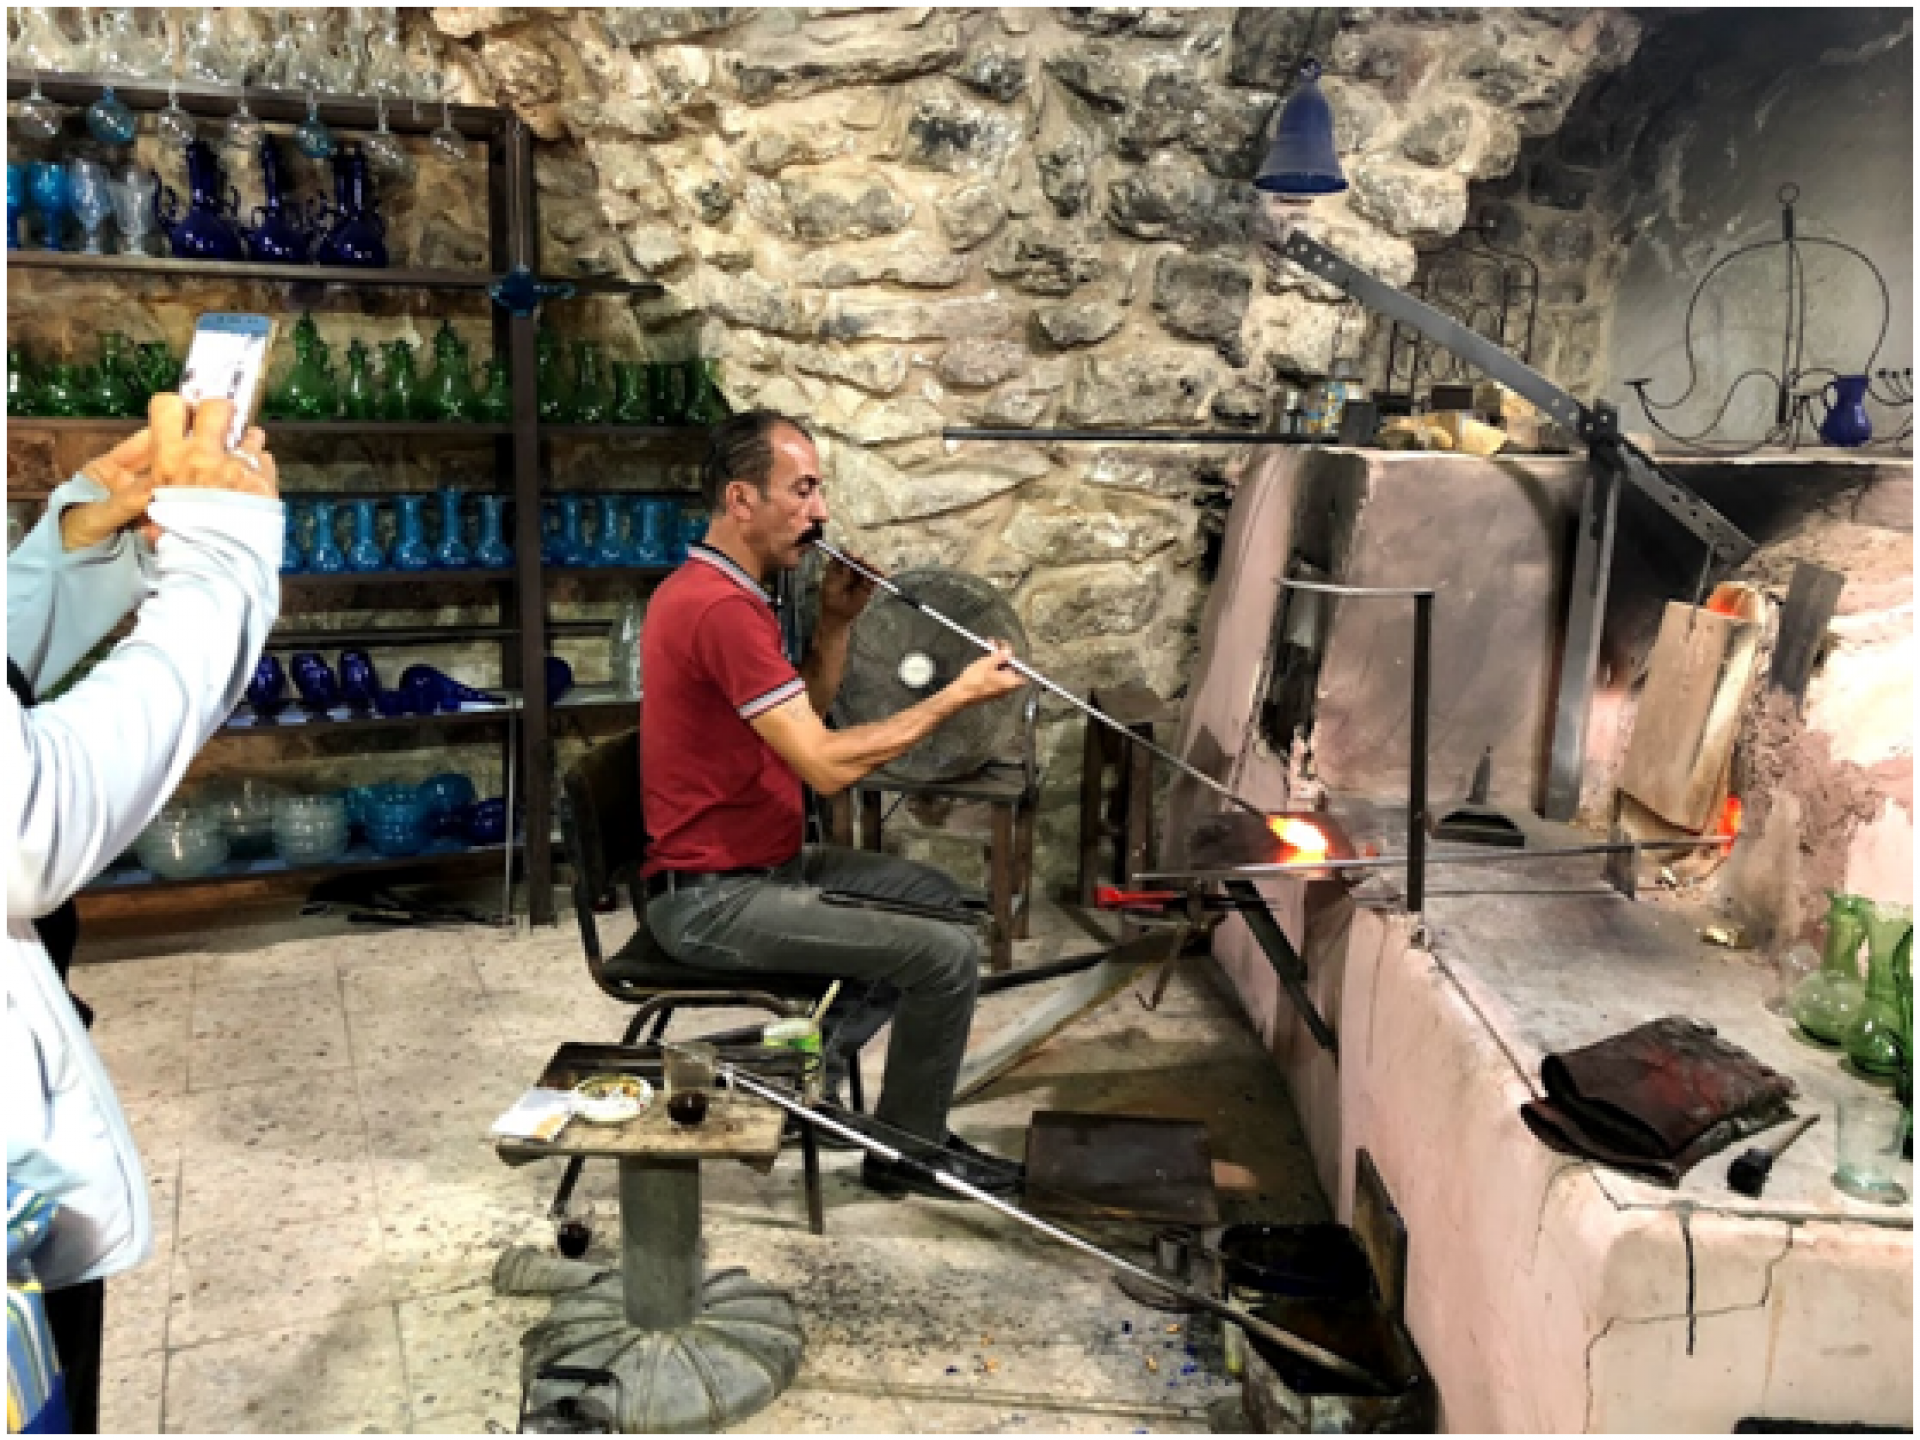 The glass artist who works in an atelier